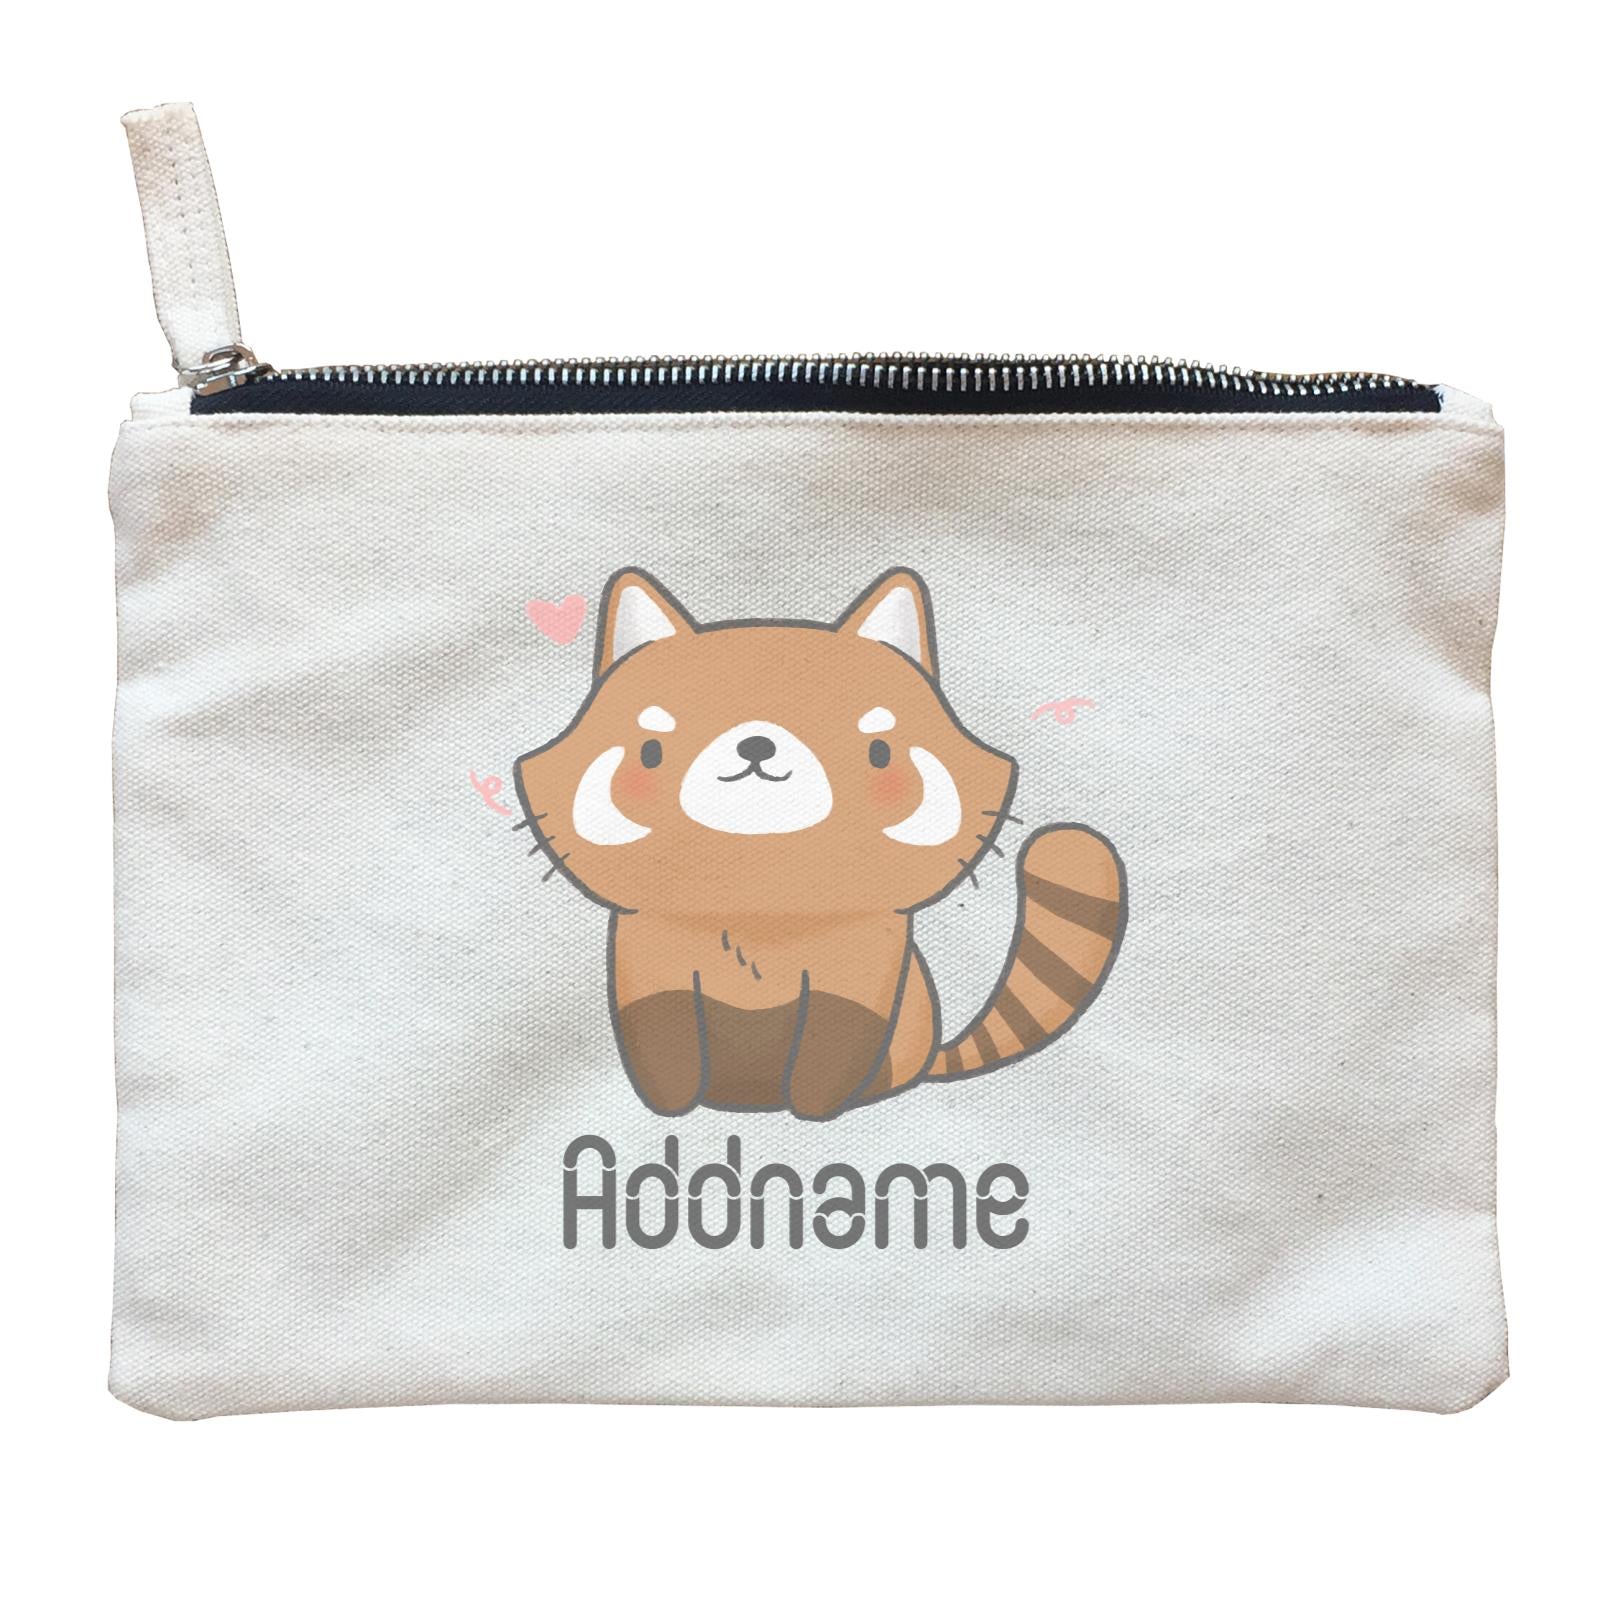 Cute Hand Drawn Style Red Panda Addname Zipper Pouch